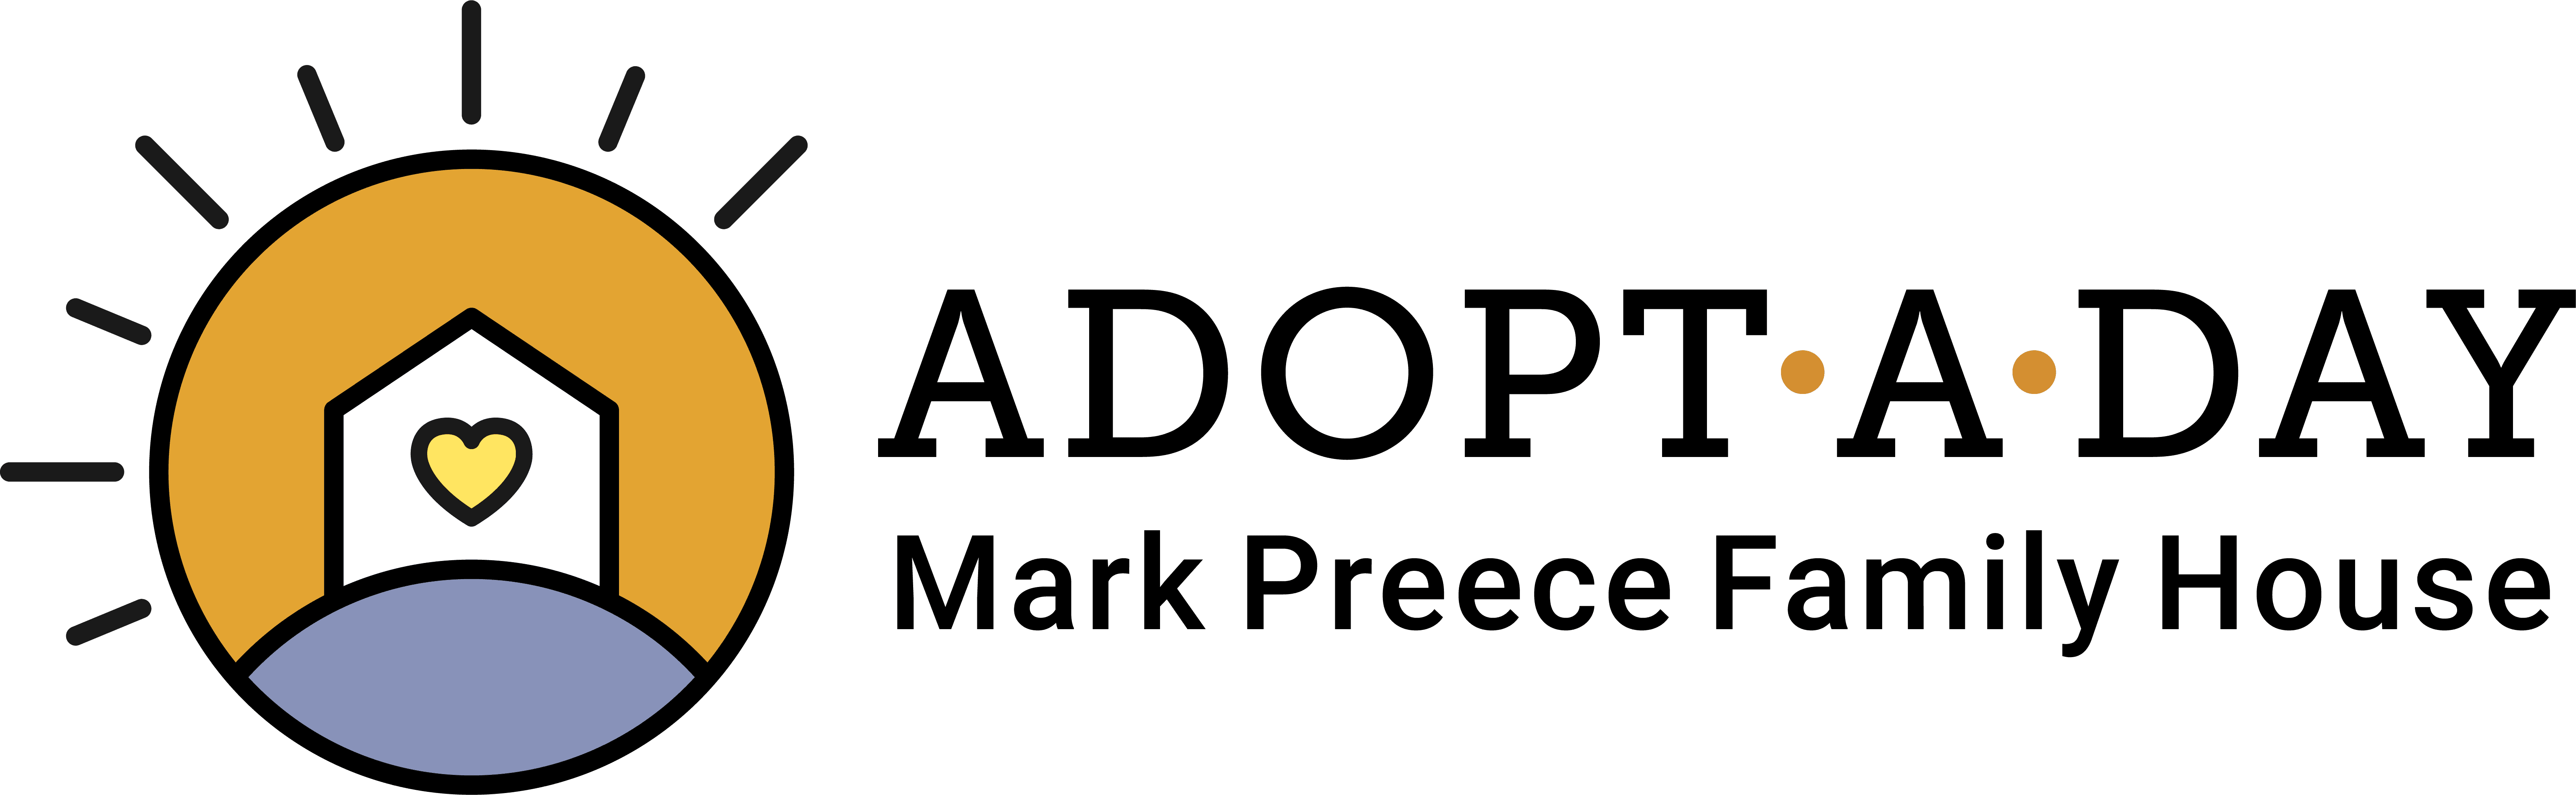 Adopt-A-Day